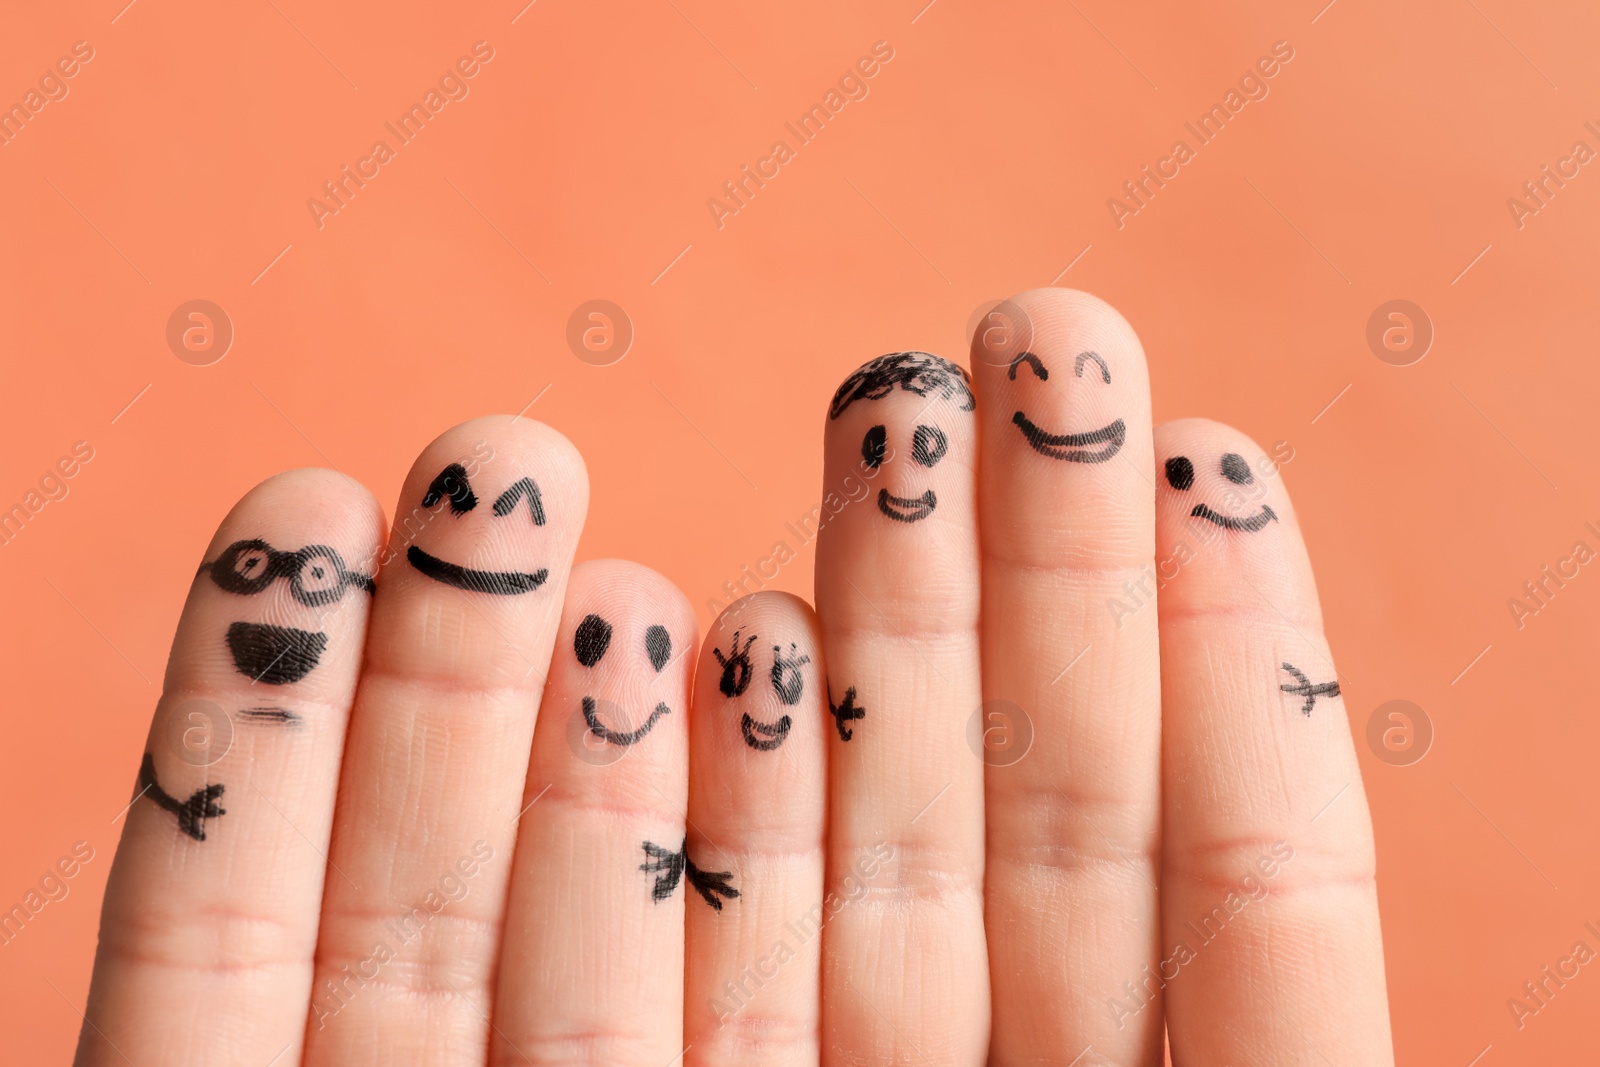 Photo of Fingers with drawings of happy faces against color background. Unity concept